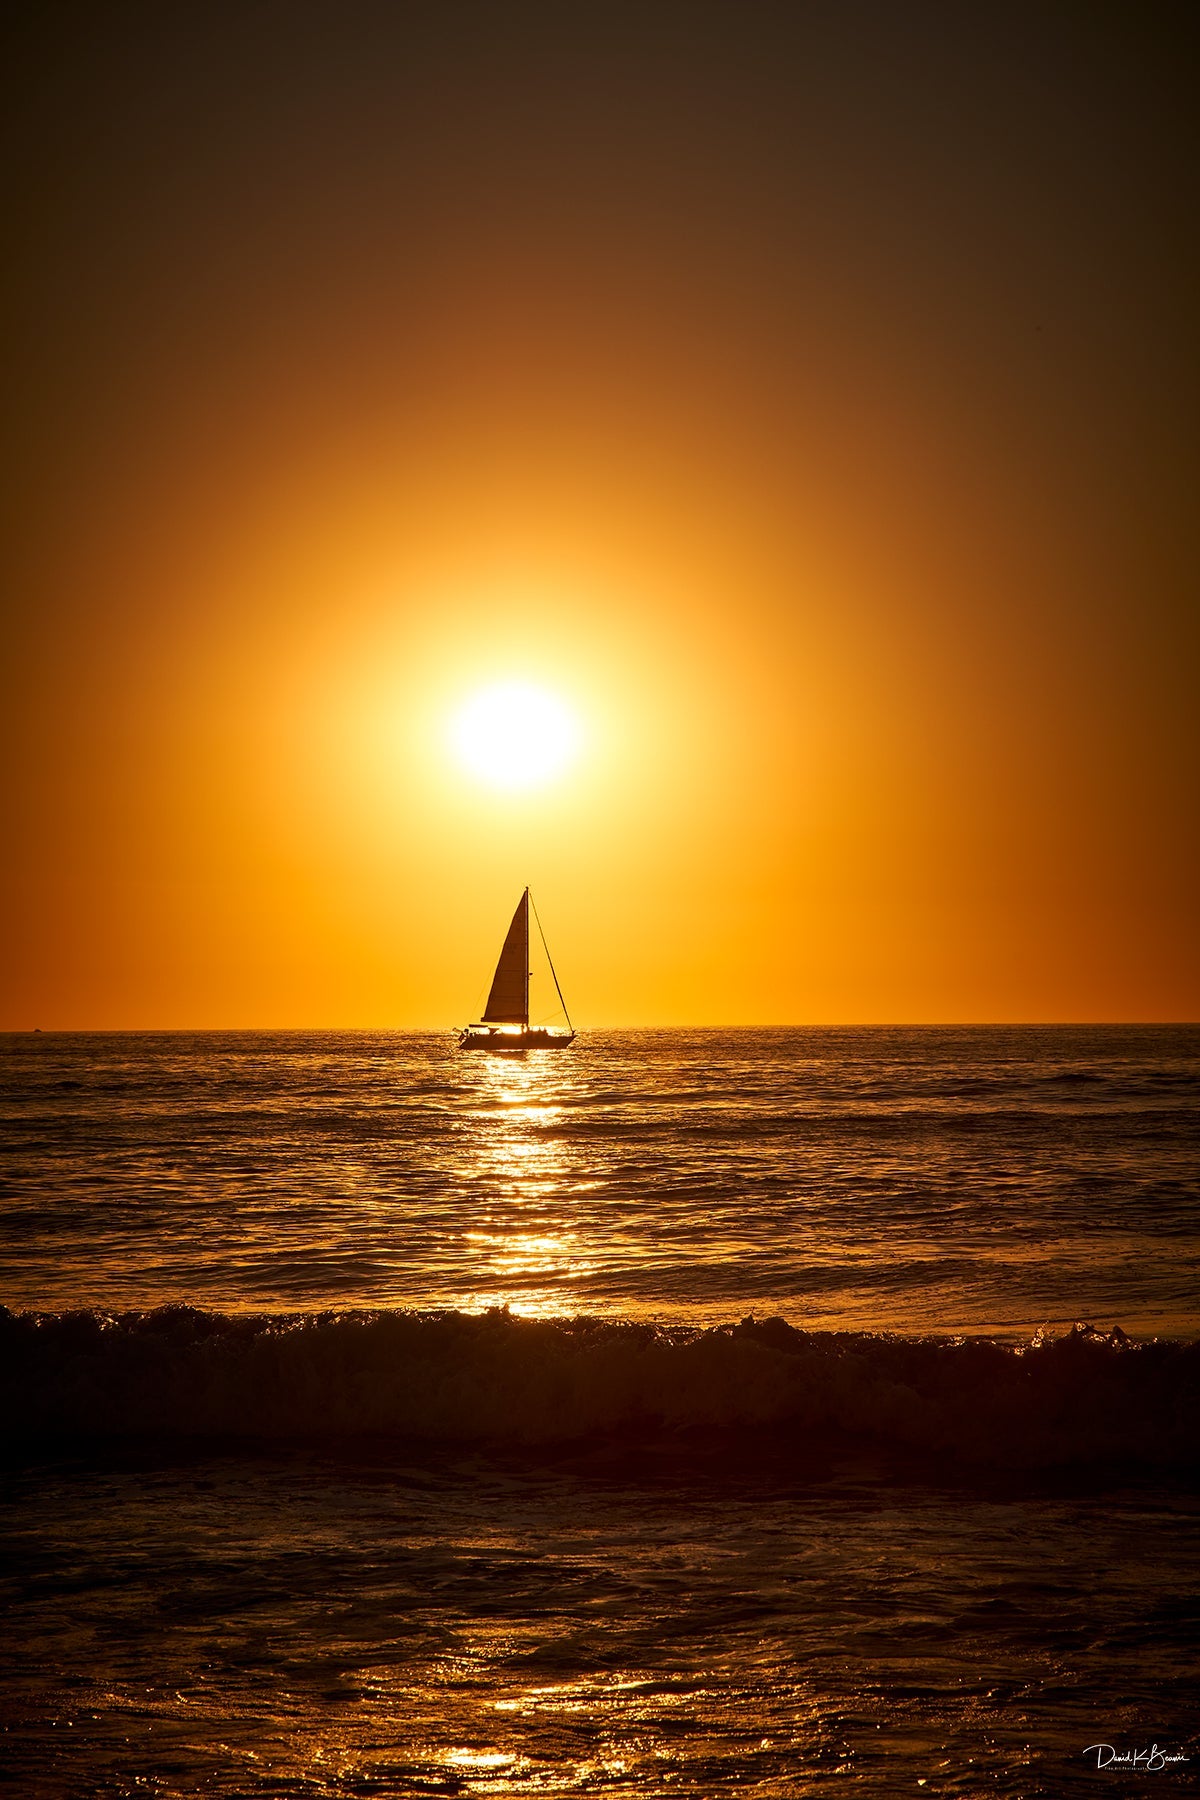 Dark orange sunset over the ocean with the silhouette of a sailboat